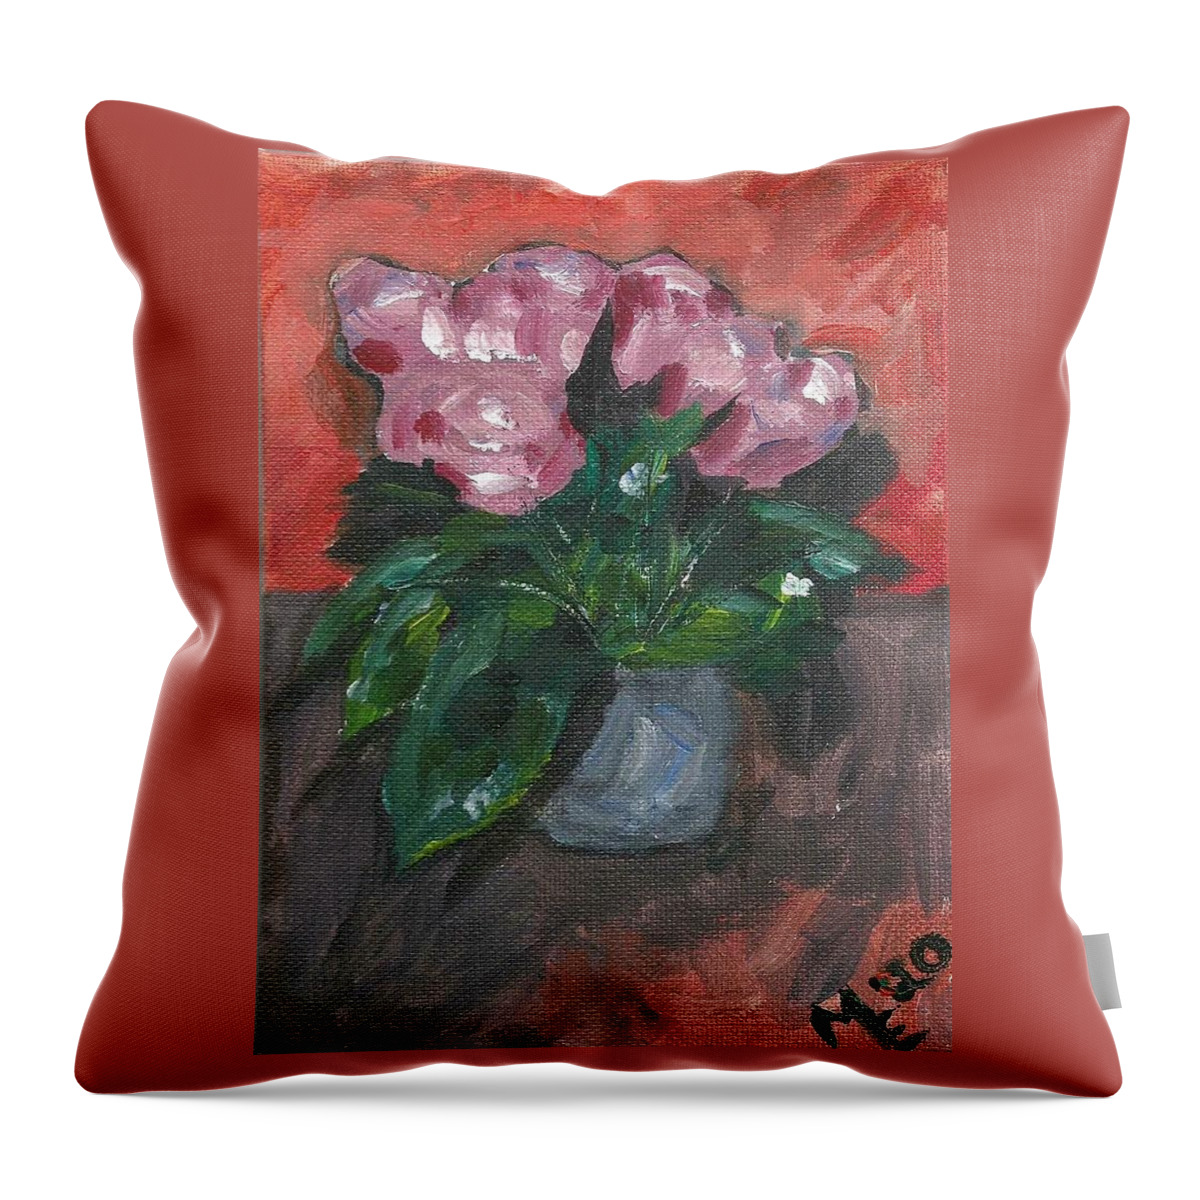 Rose Throw Pillow featuring the painting Vase Of Roses by Monica Resinger